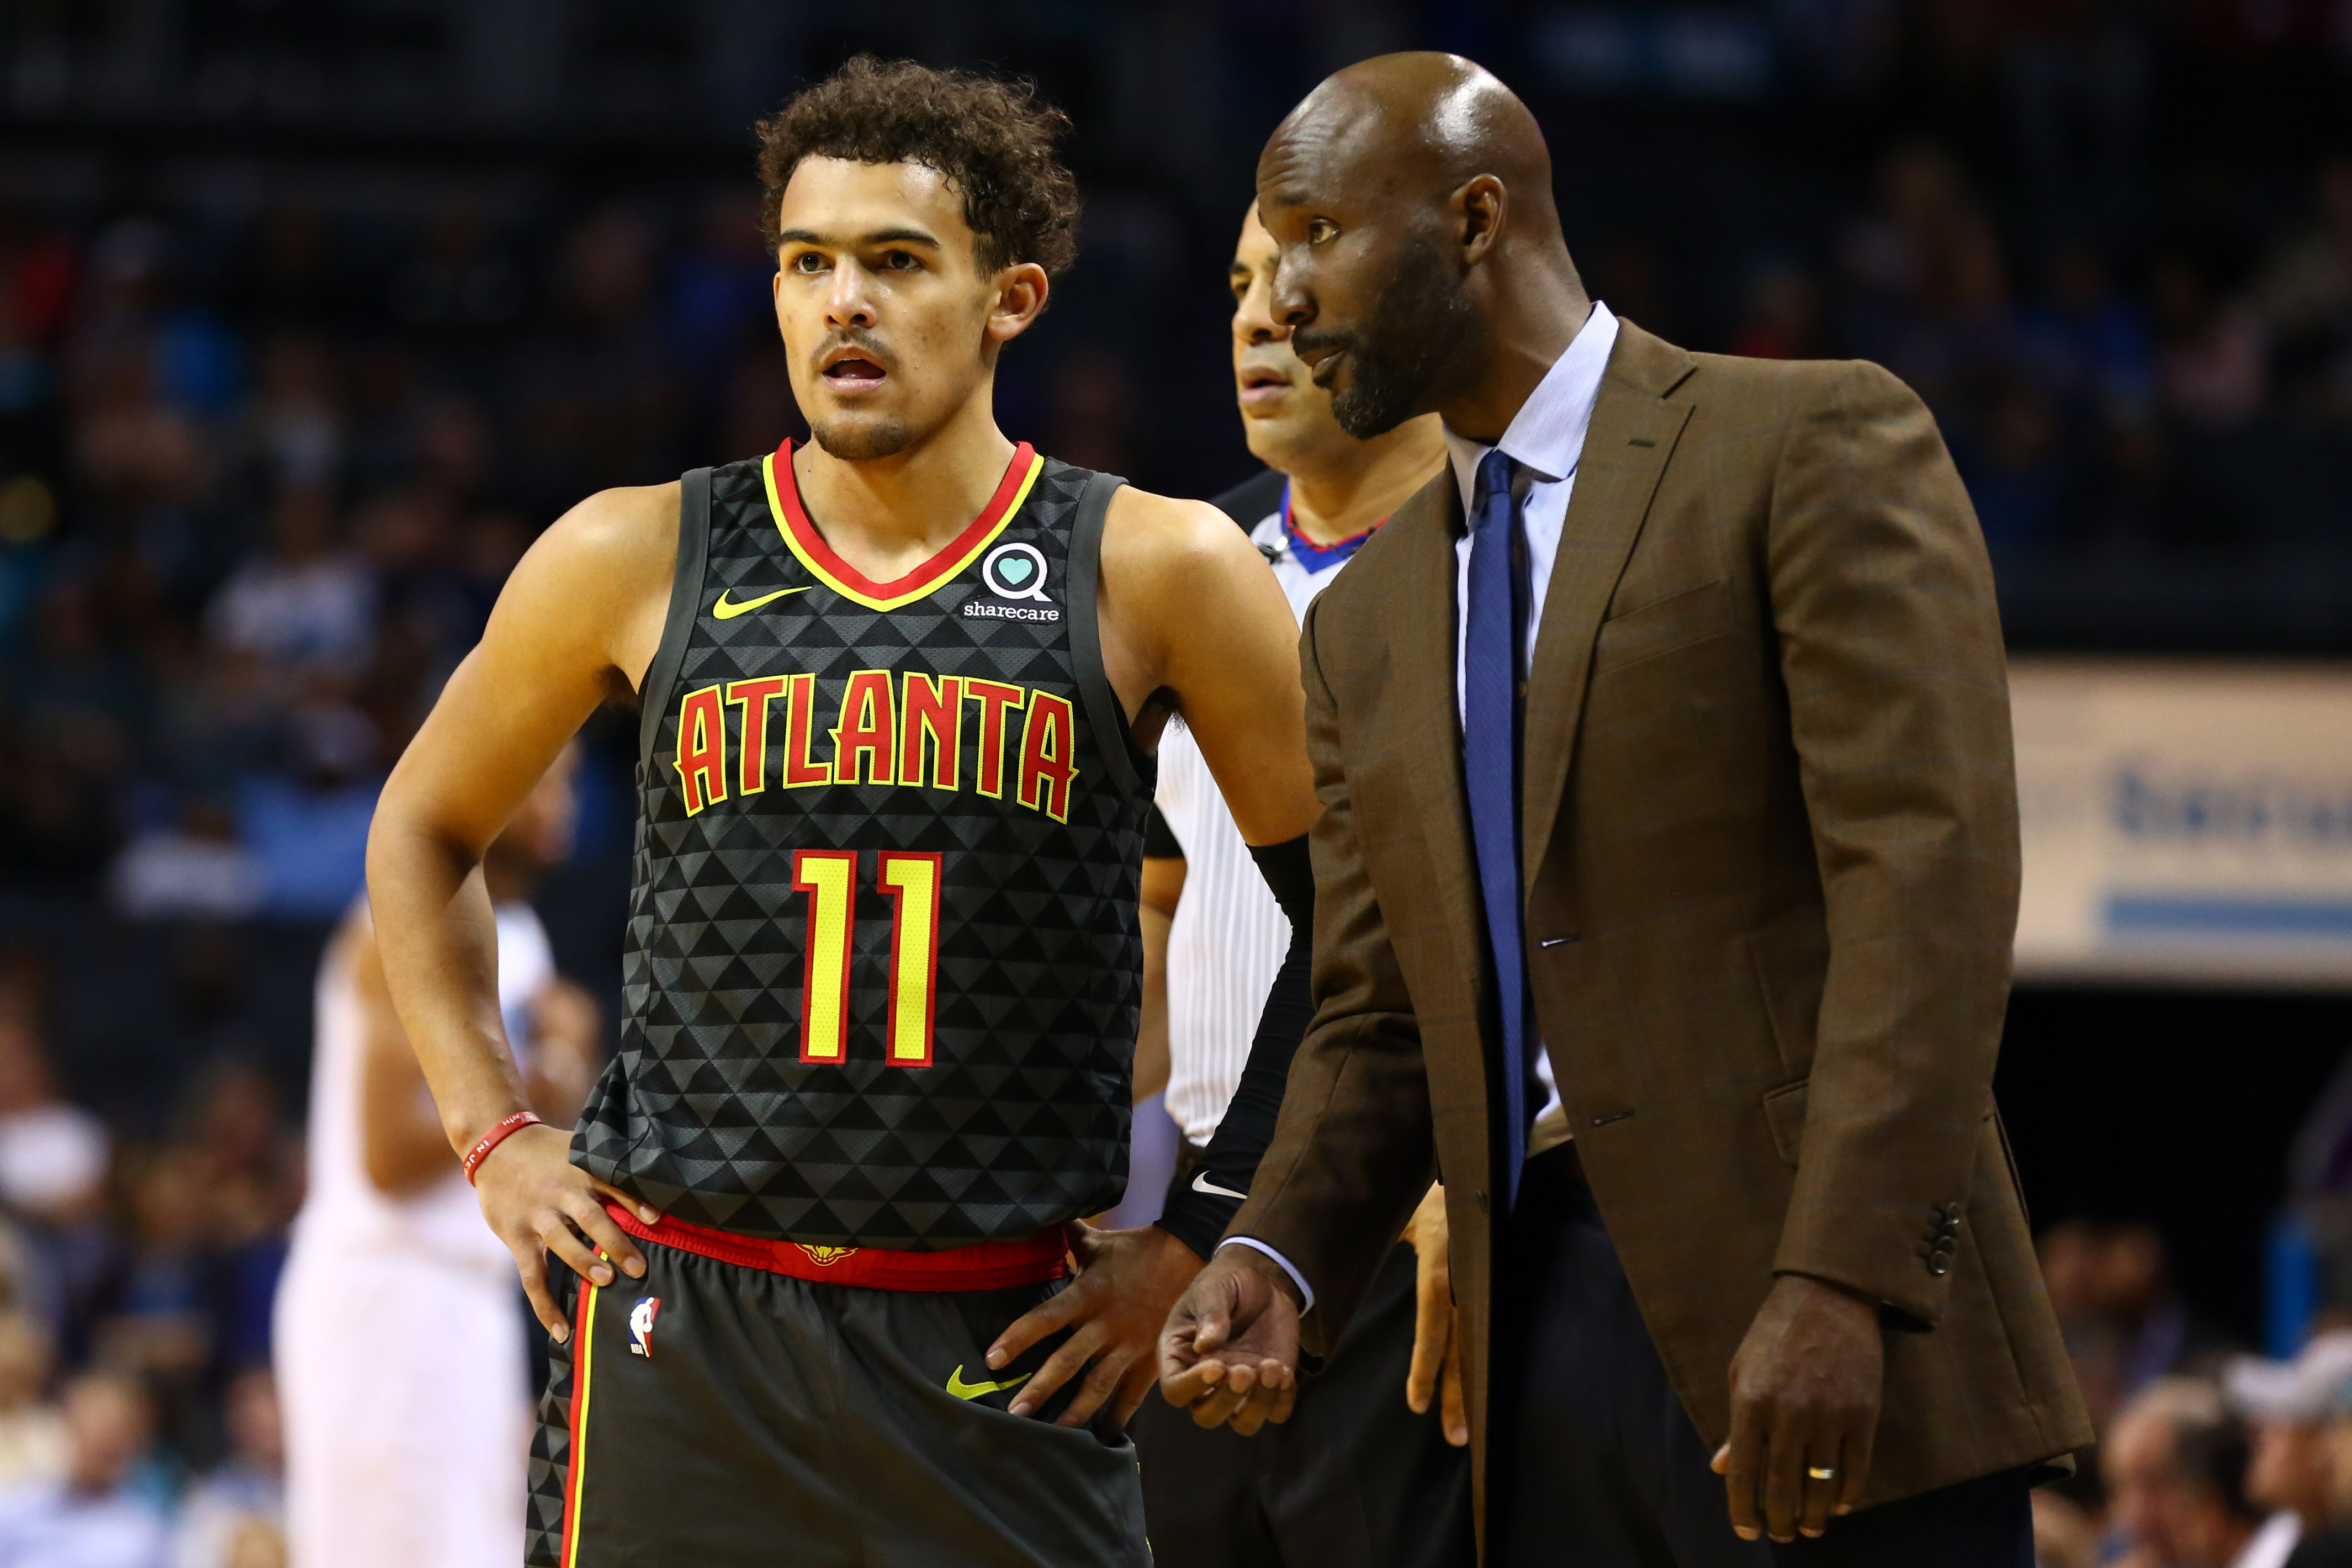 Atlanta Hawks guard Trae Young (11) talks with head coach Lloyd Pierce during the first half against the Charlotte Hornets at Spectrum Center.